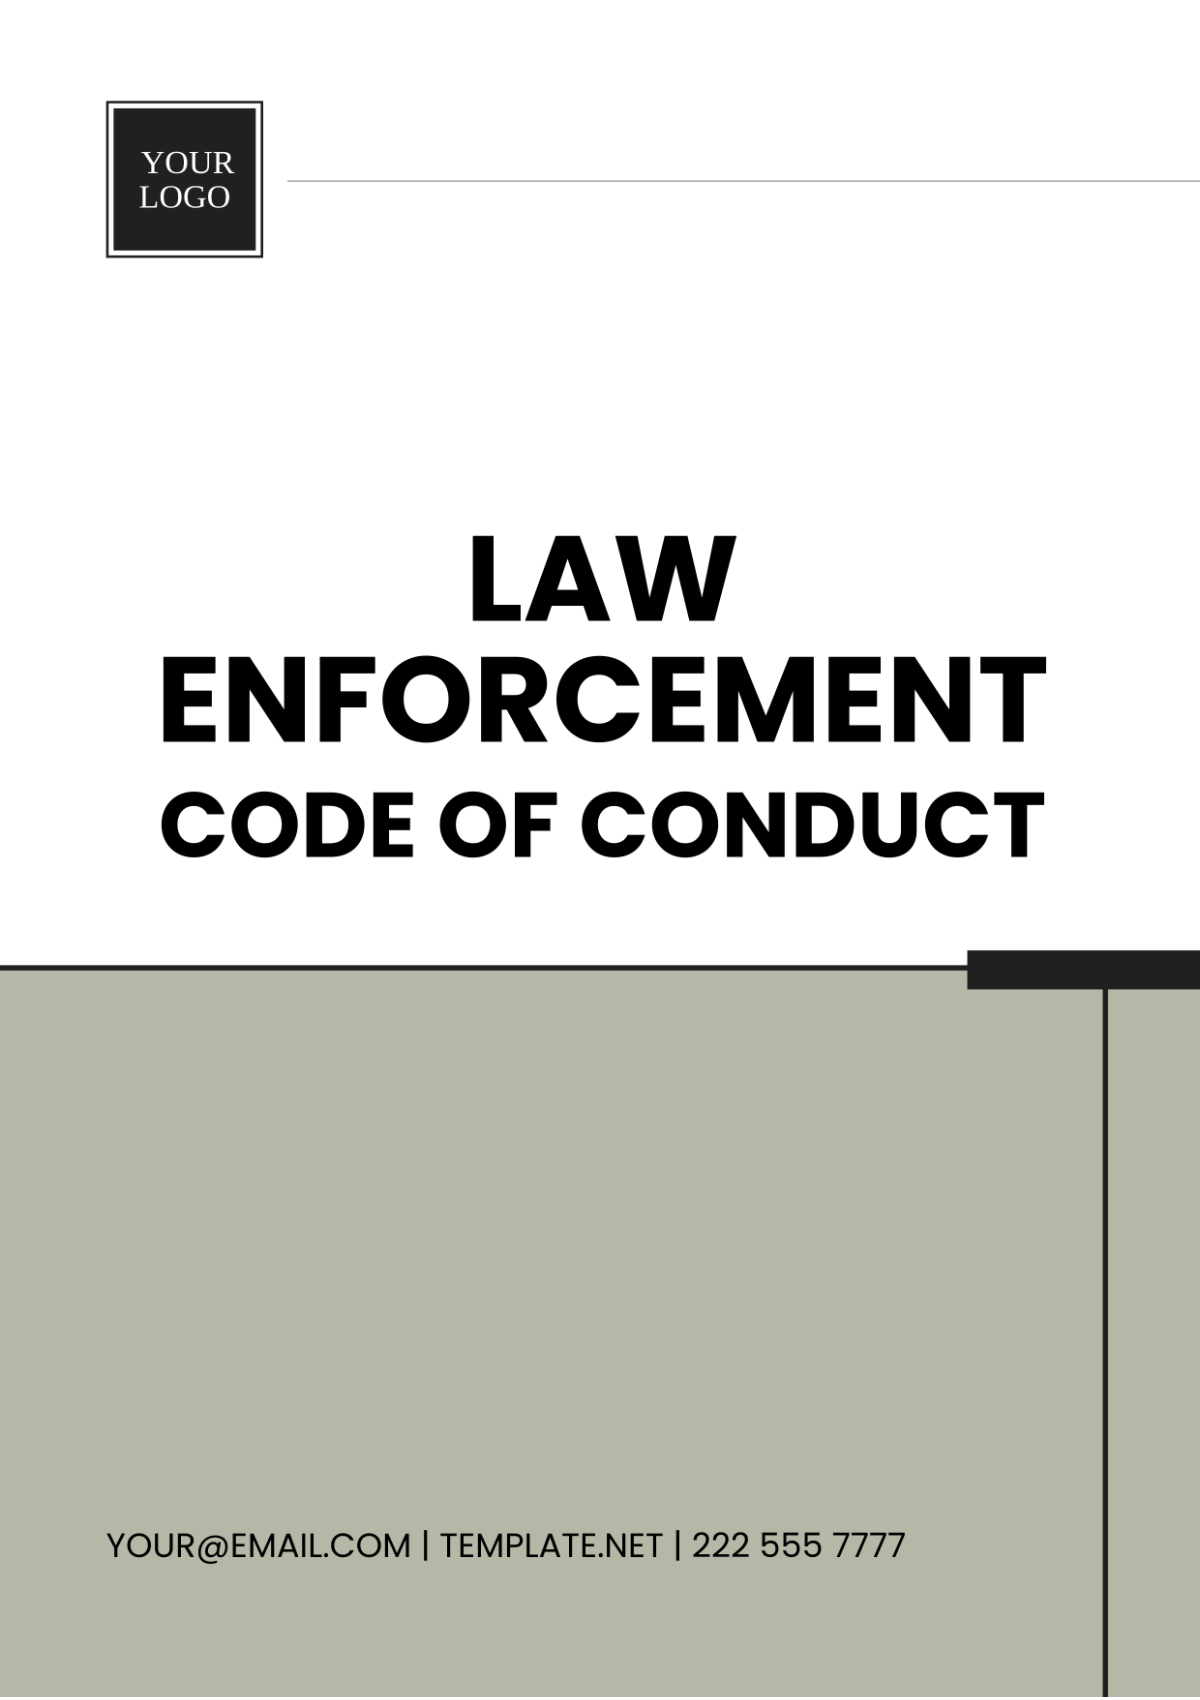 Law Enforcement Code of Conduct Template